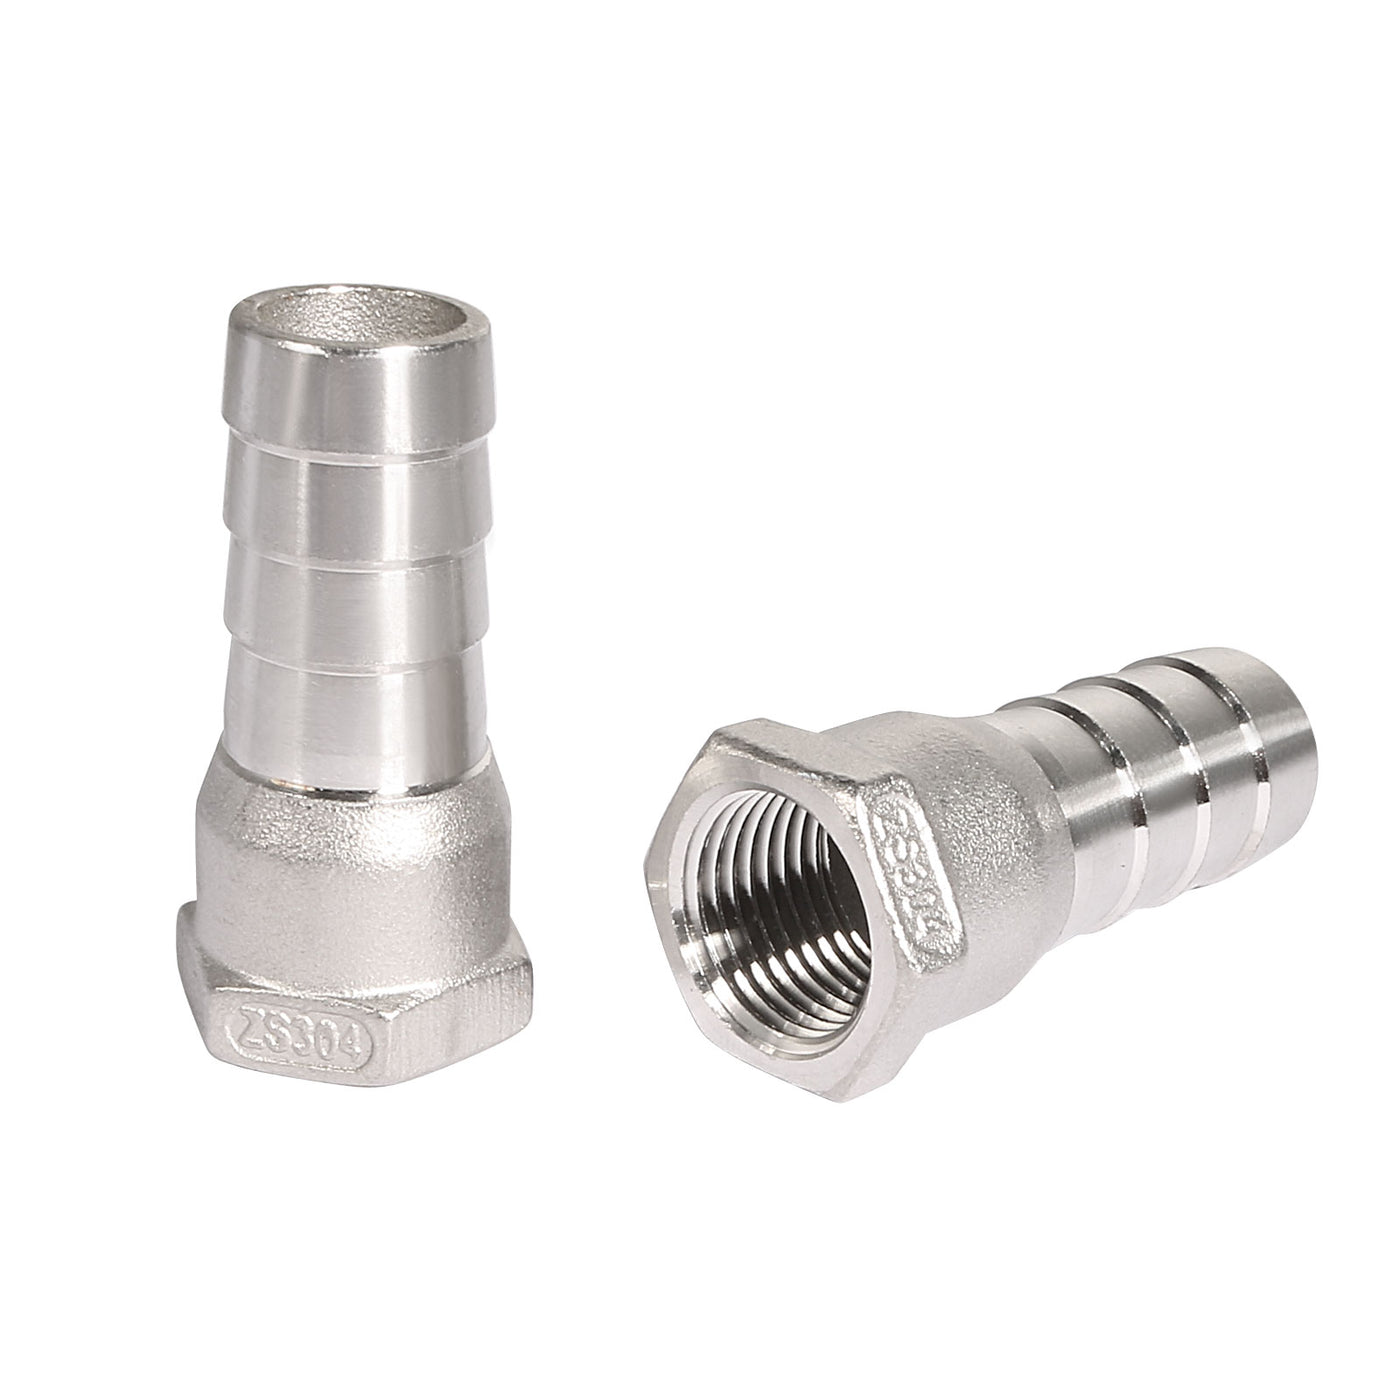 uxcell Uxcell 304 Stainless Steel Hose Barb Fitting Coupler 20mm Barb G1/2 Female Thread